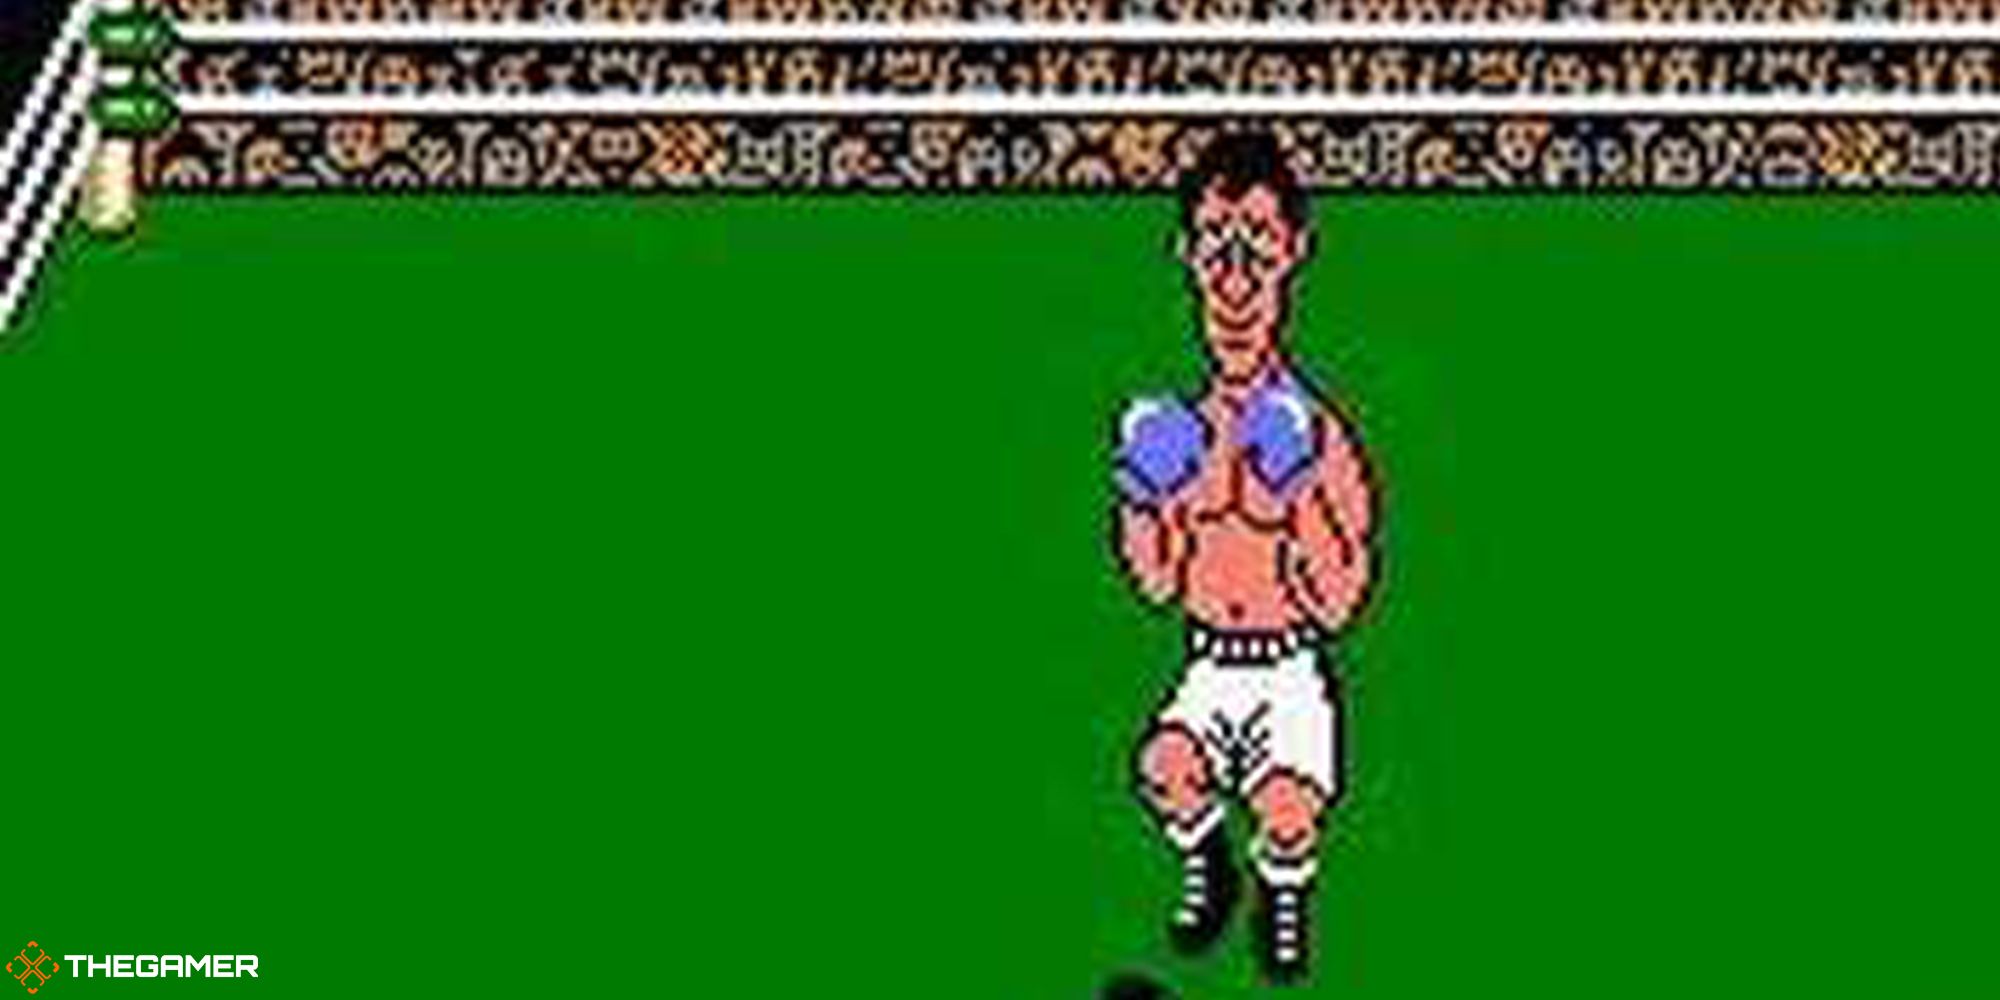 Nintendo's Punch-Out!! - Don Flamenco 2